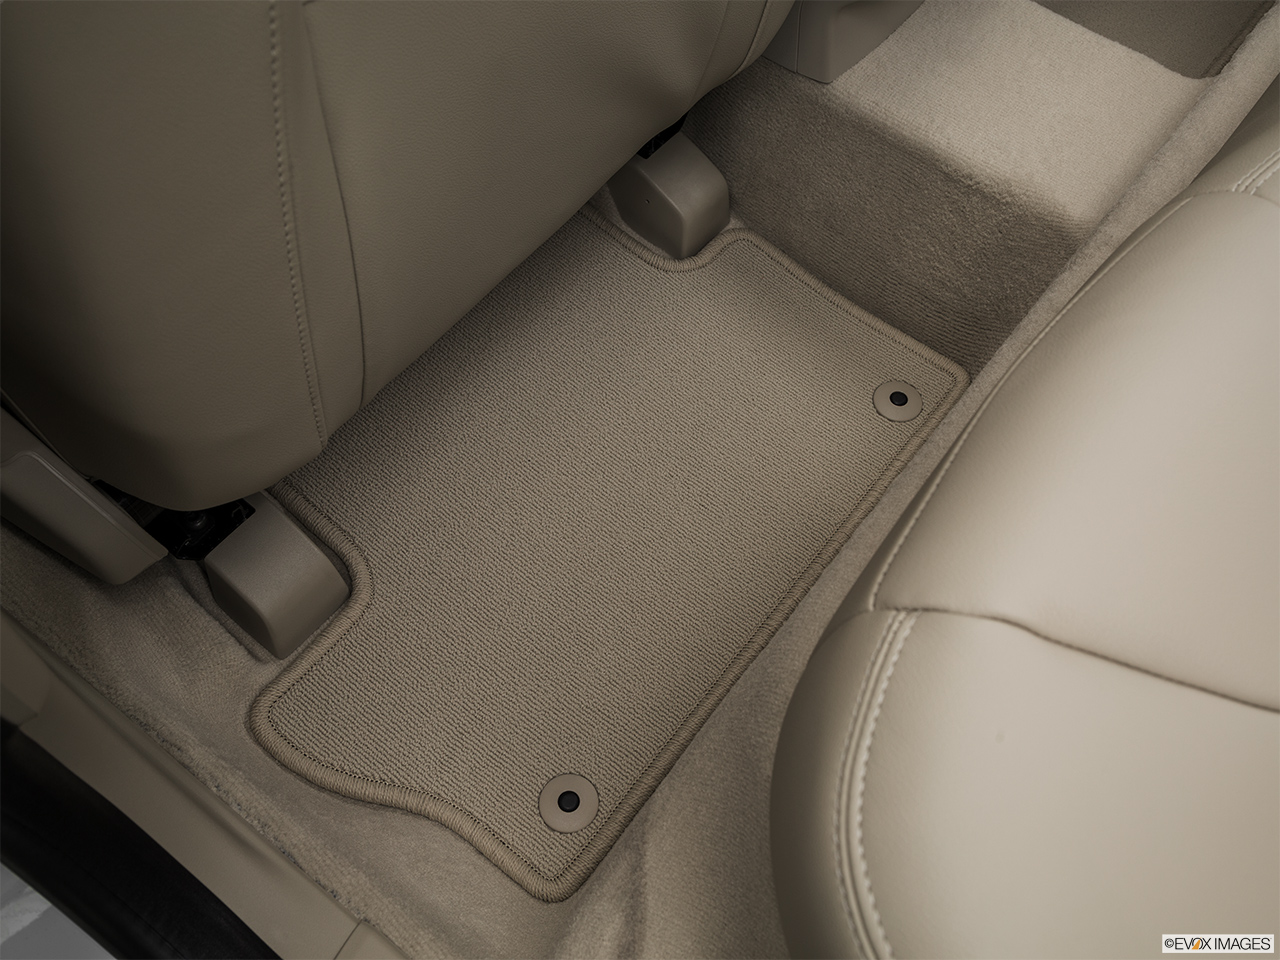 2016 Volvo XC60 T5 Drive-E FWD Premier Rear driver's side floor mat. Mid-seat level from outside looking in. 